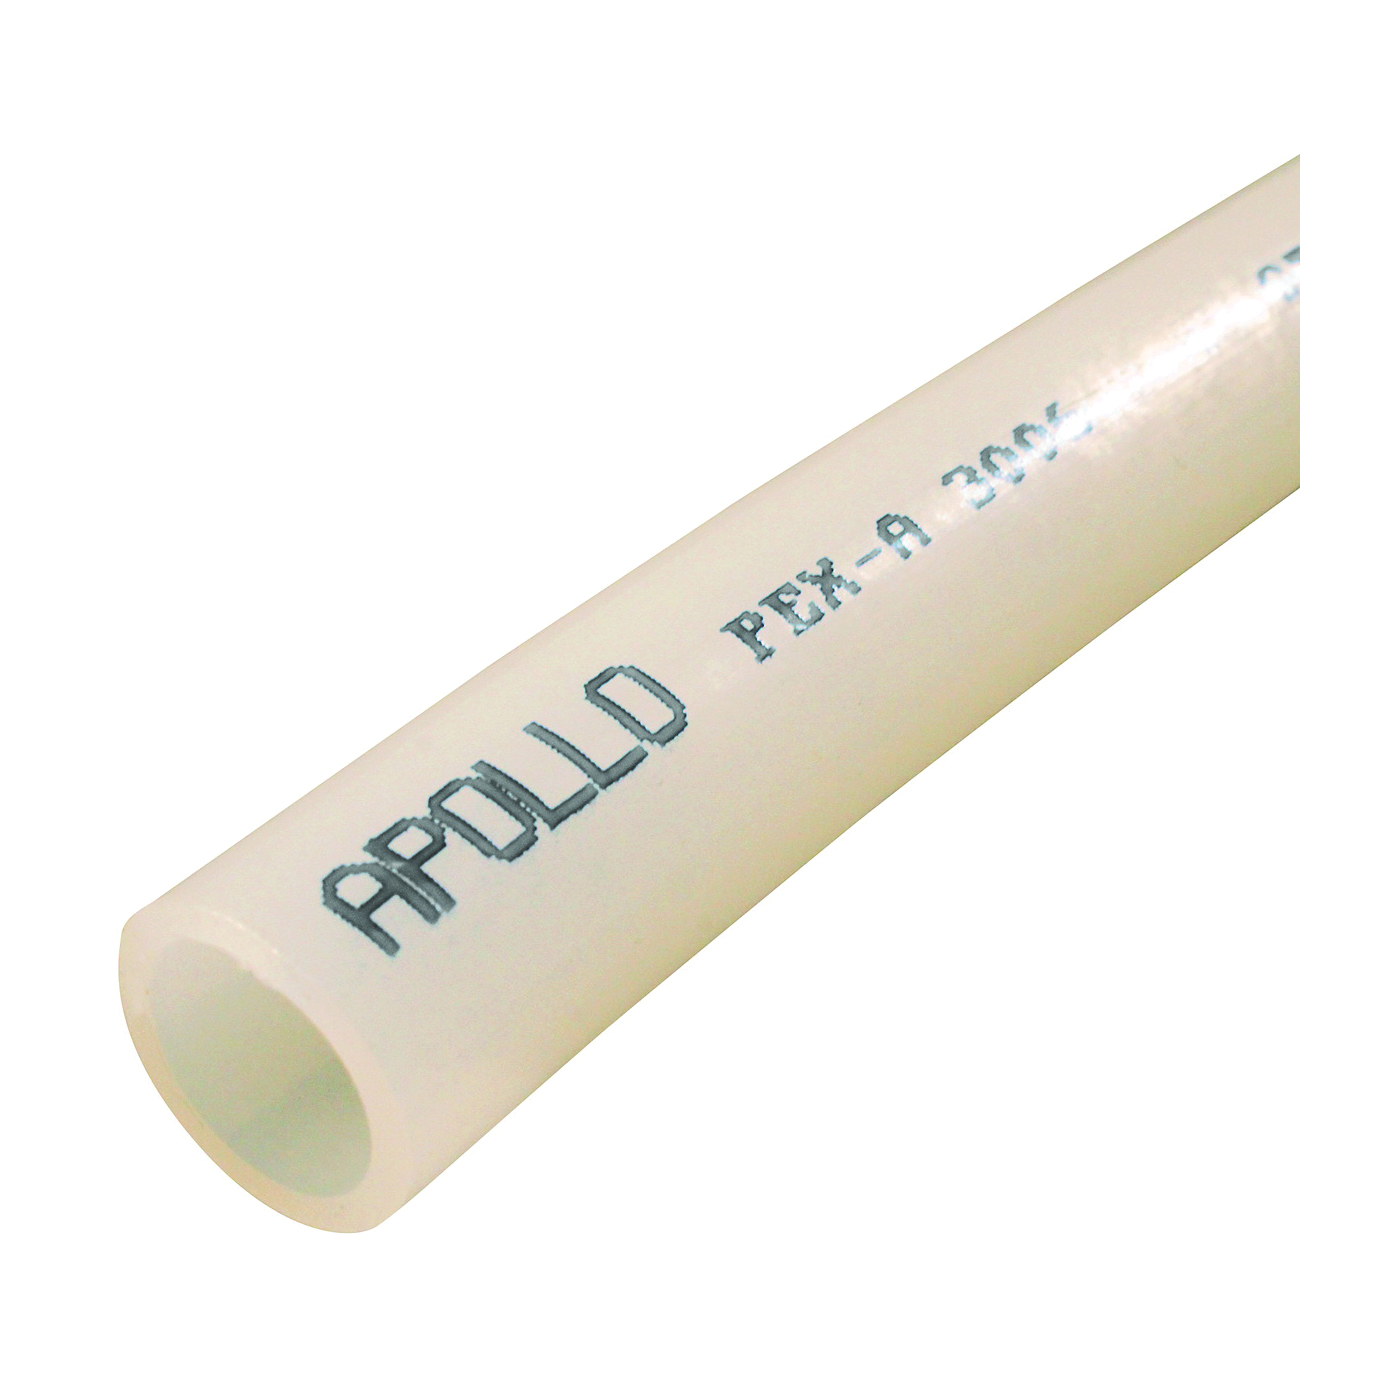 EPPW534 PEX-A Pipe Tubing, 3/4 in, Opaque, 5 ft L